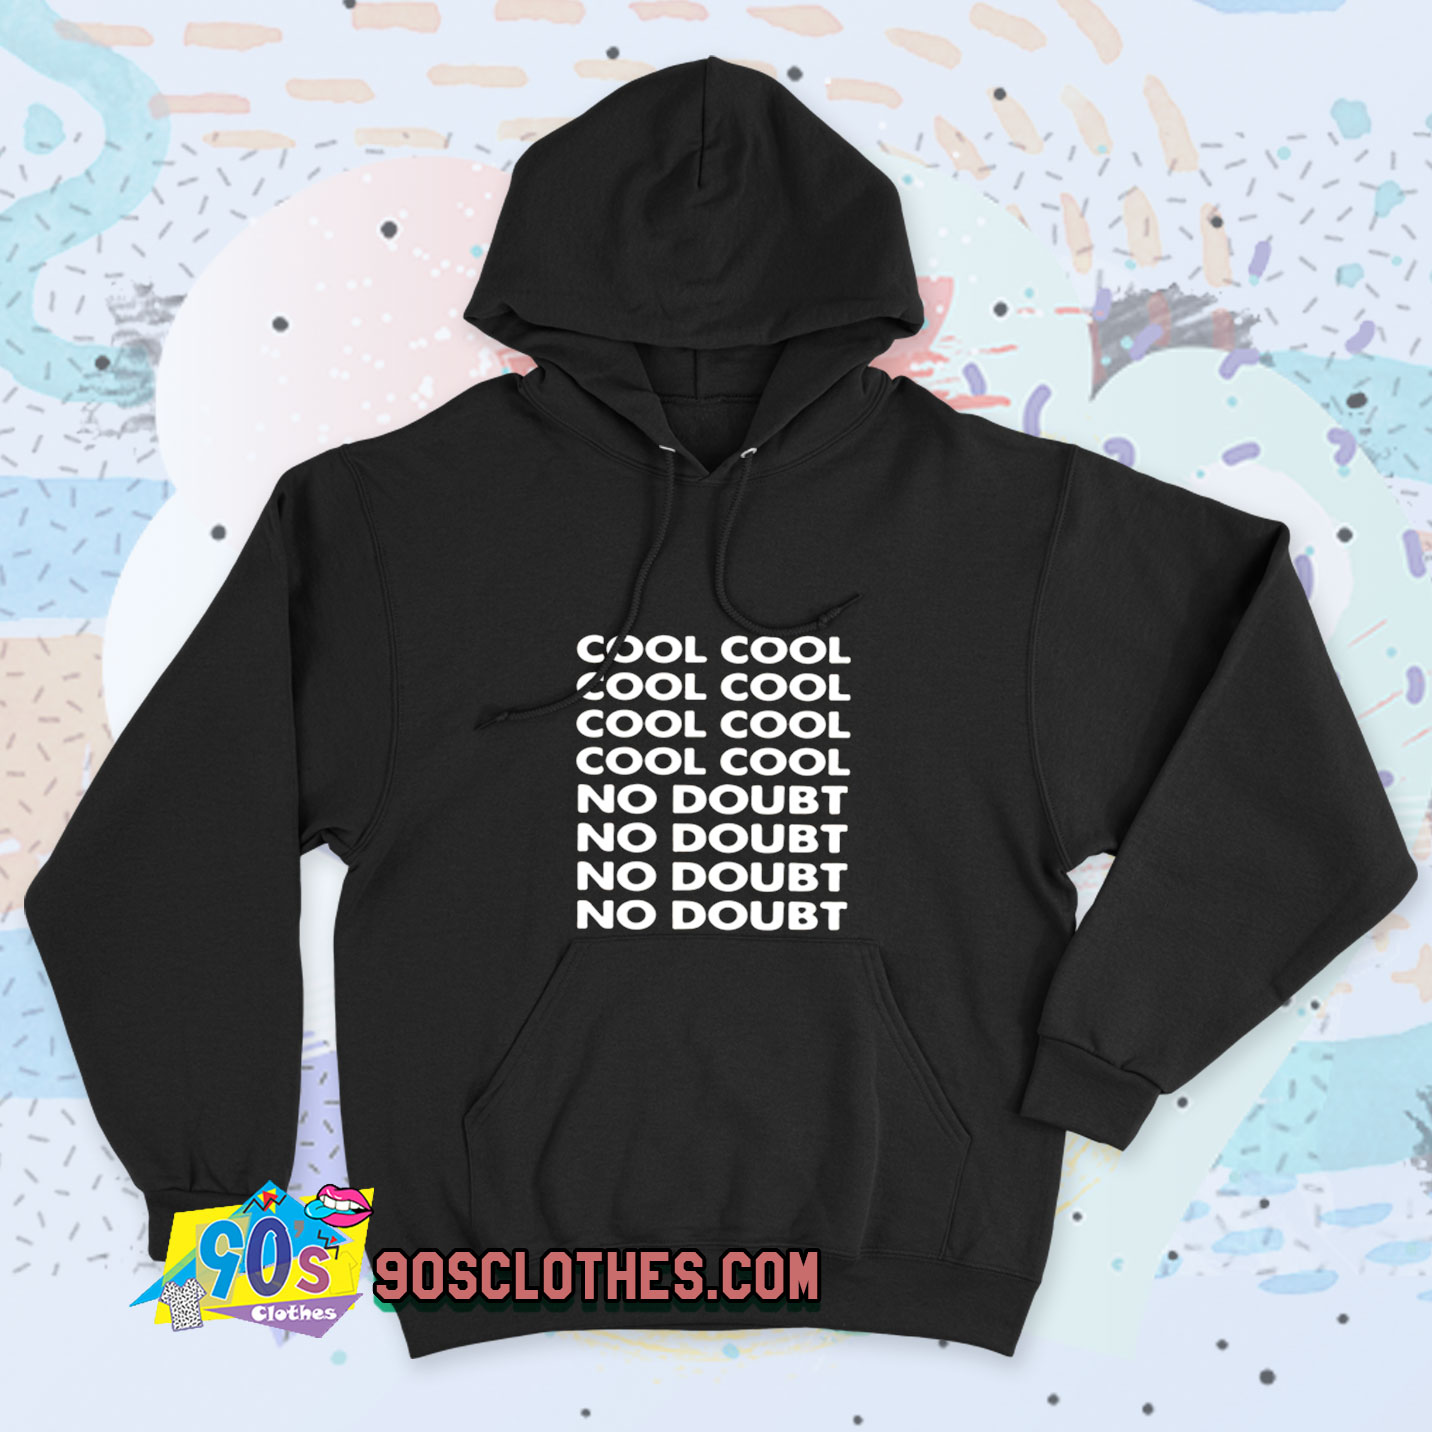 New Cool Cool No Doubt Brooklyn 99 Quote Hoodie 90sclothes Com